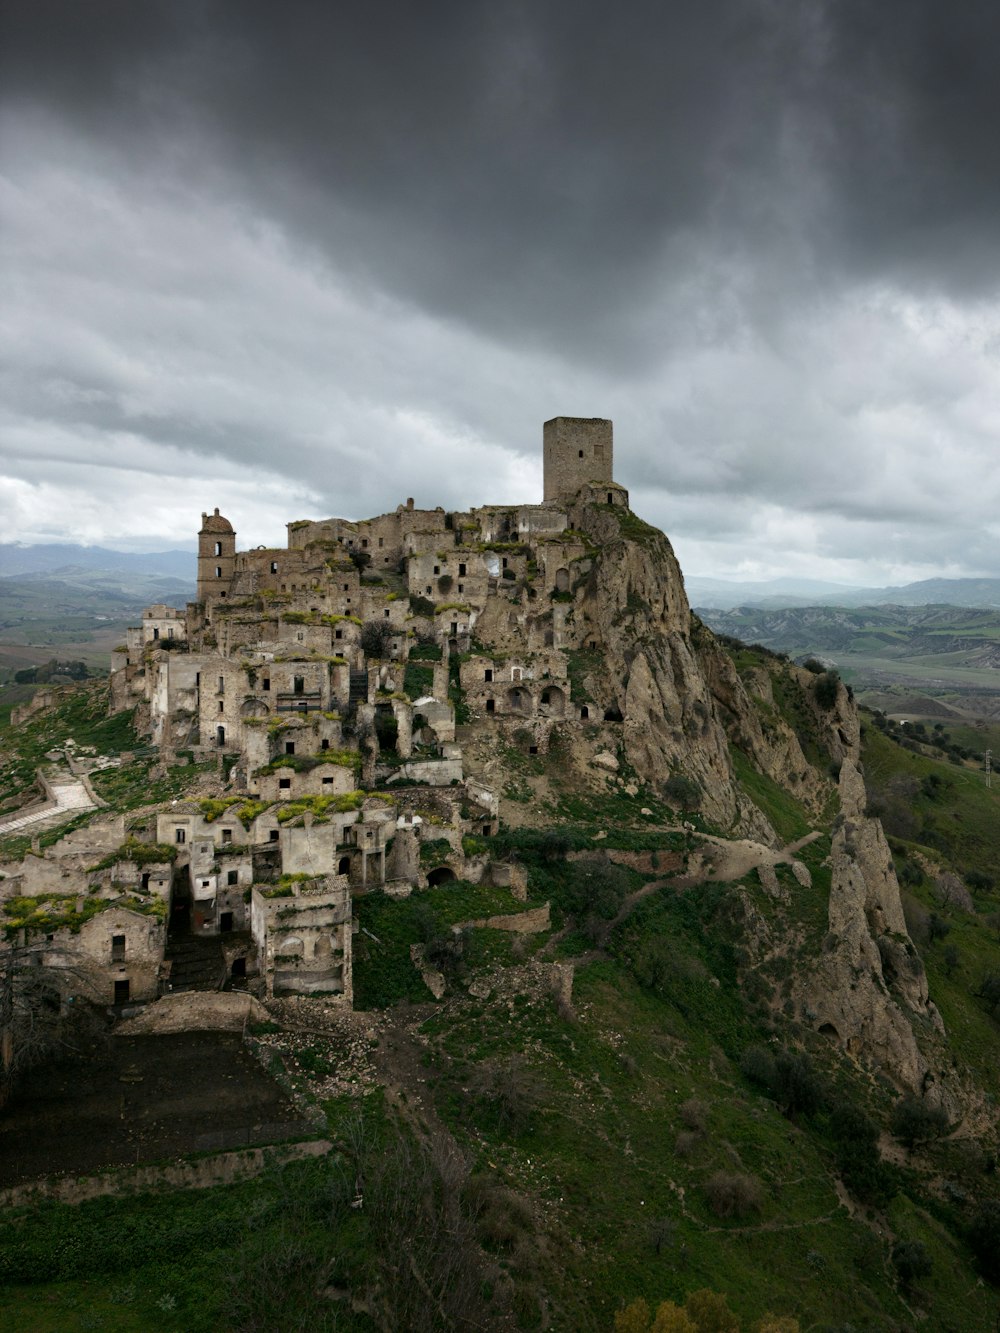 a castle perched on top of a mountain under a cloudy sky